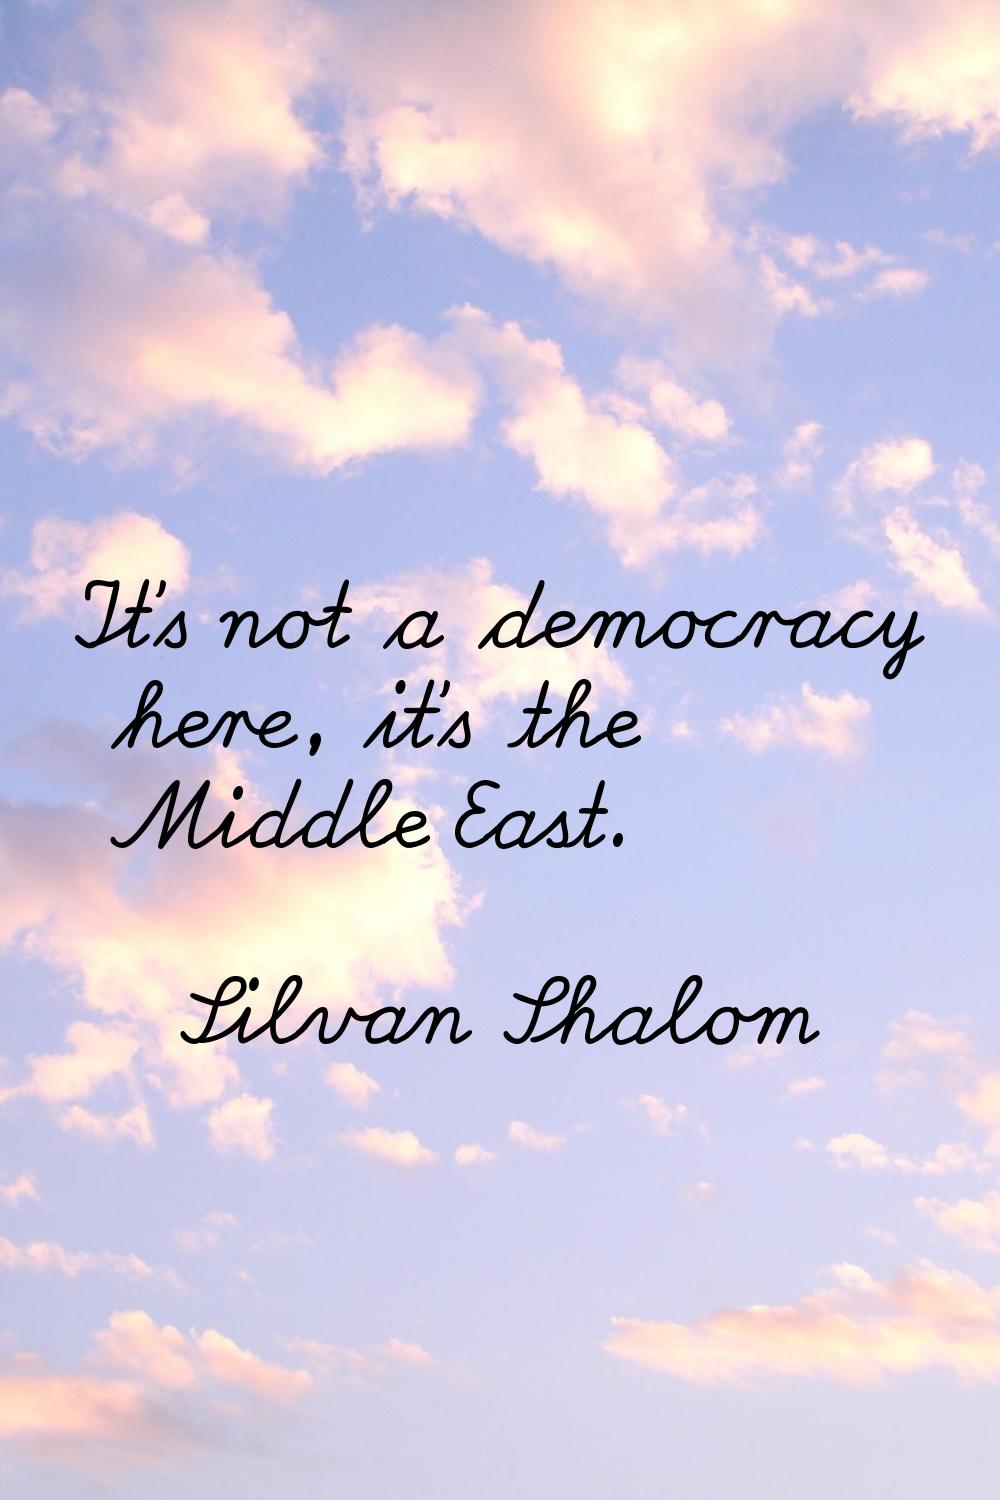 It's not a democracy here, it's the Middle East.